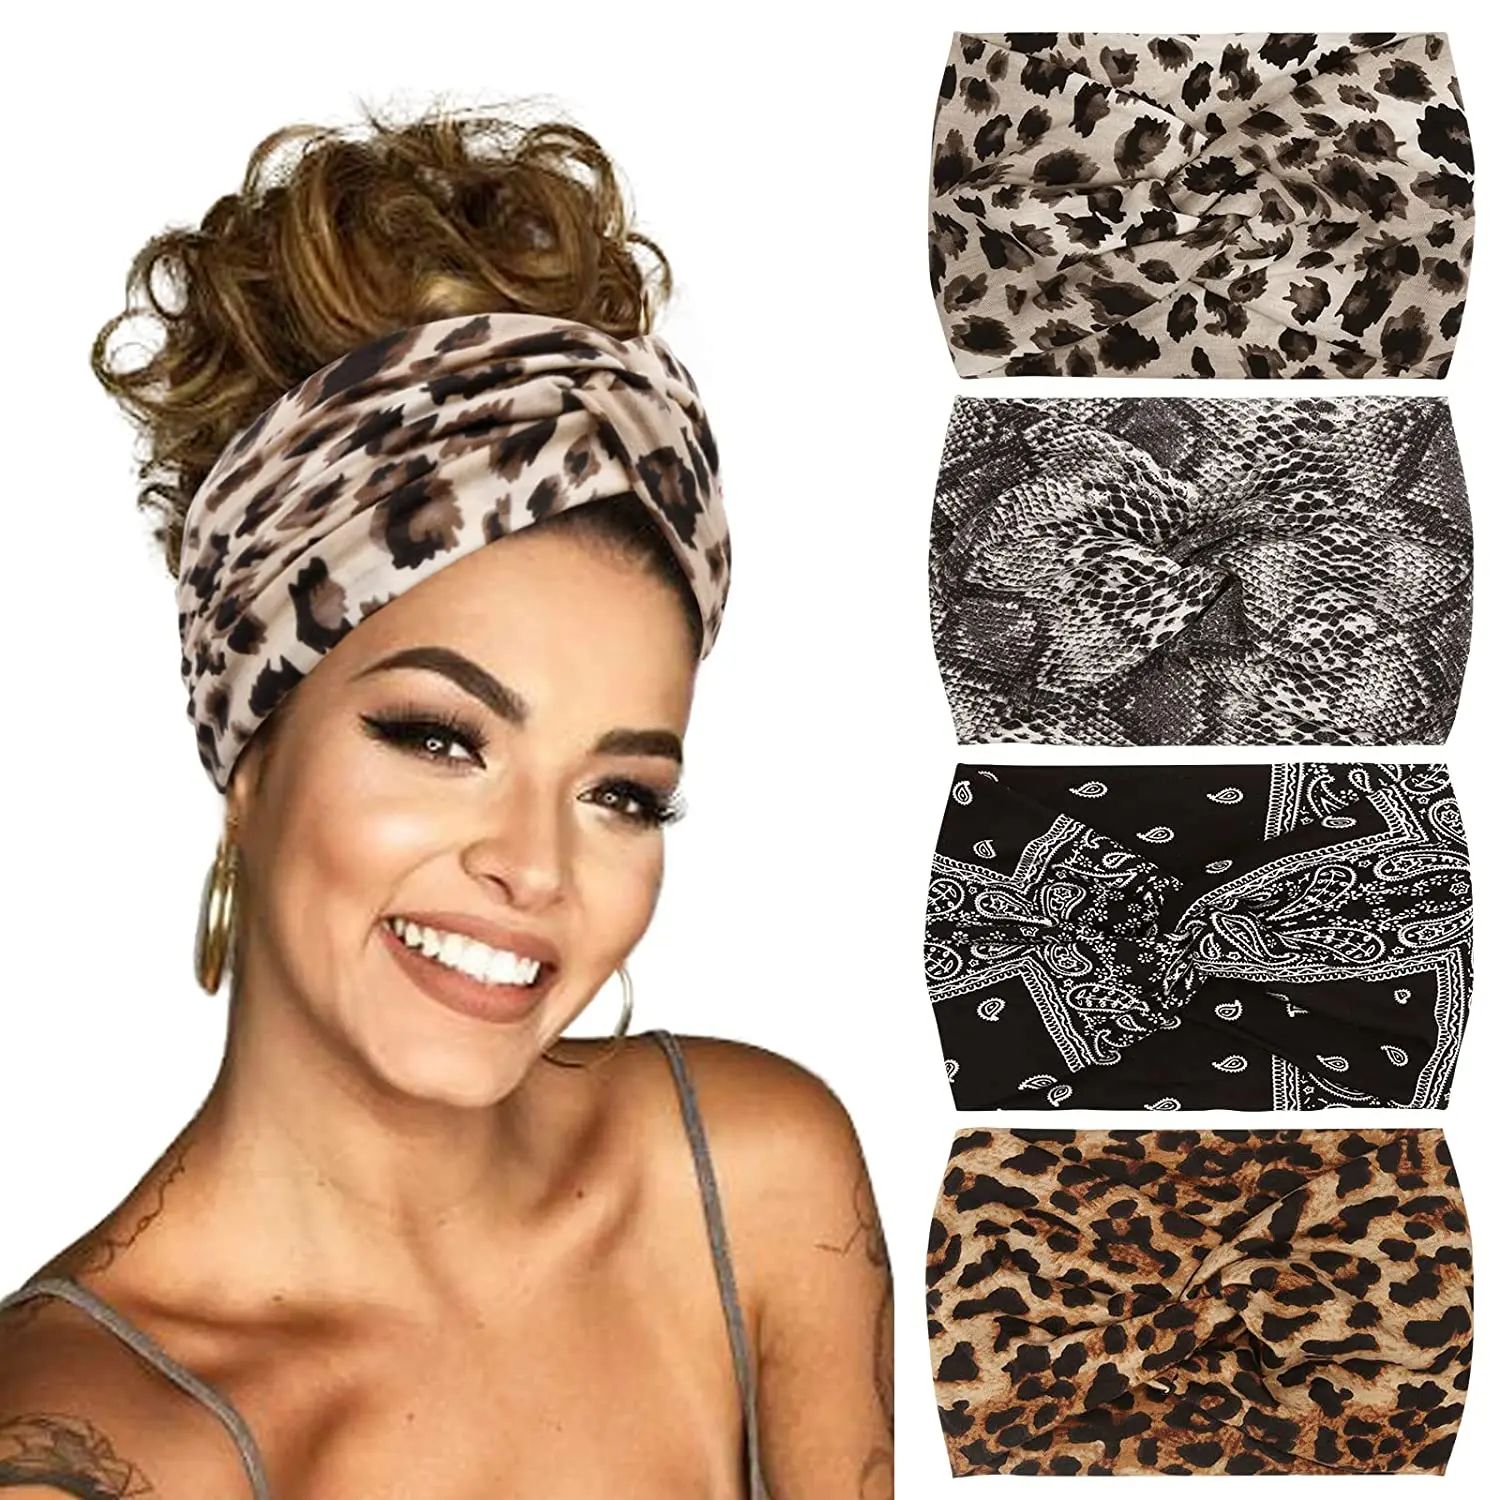 Yoga Headbands For Women's Hair Wide Thick Stretchy Boho Tur